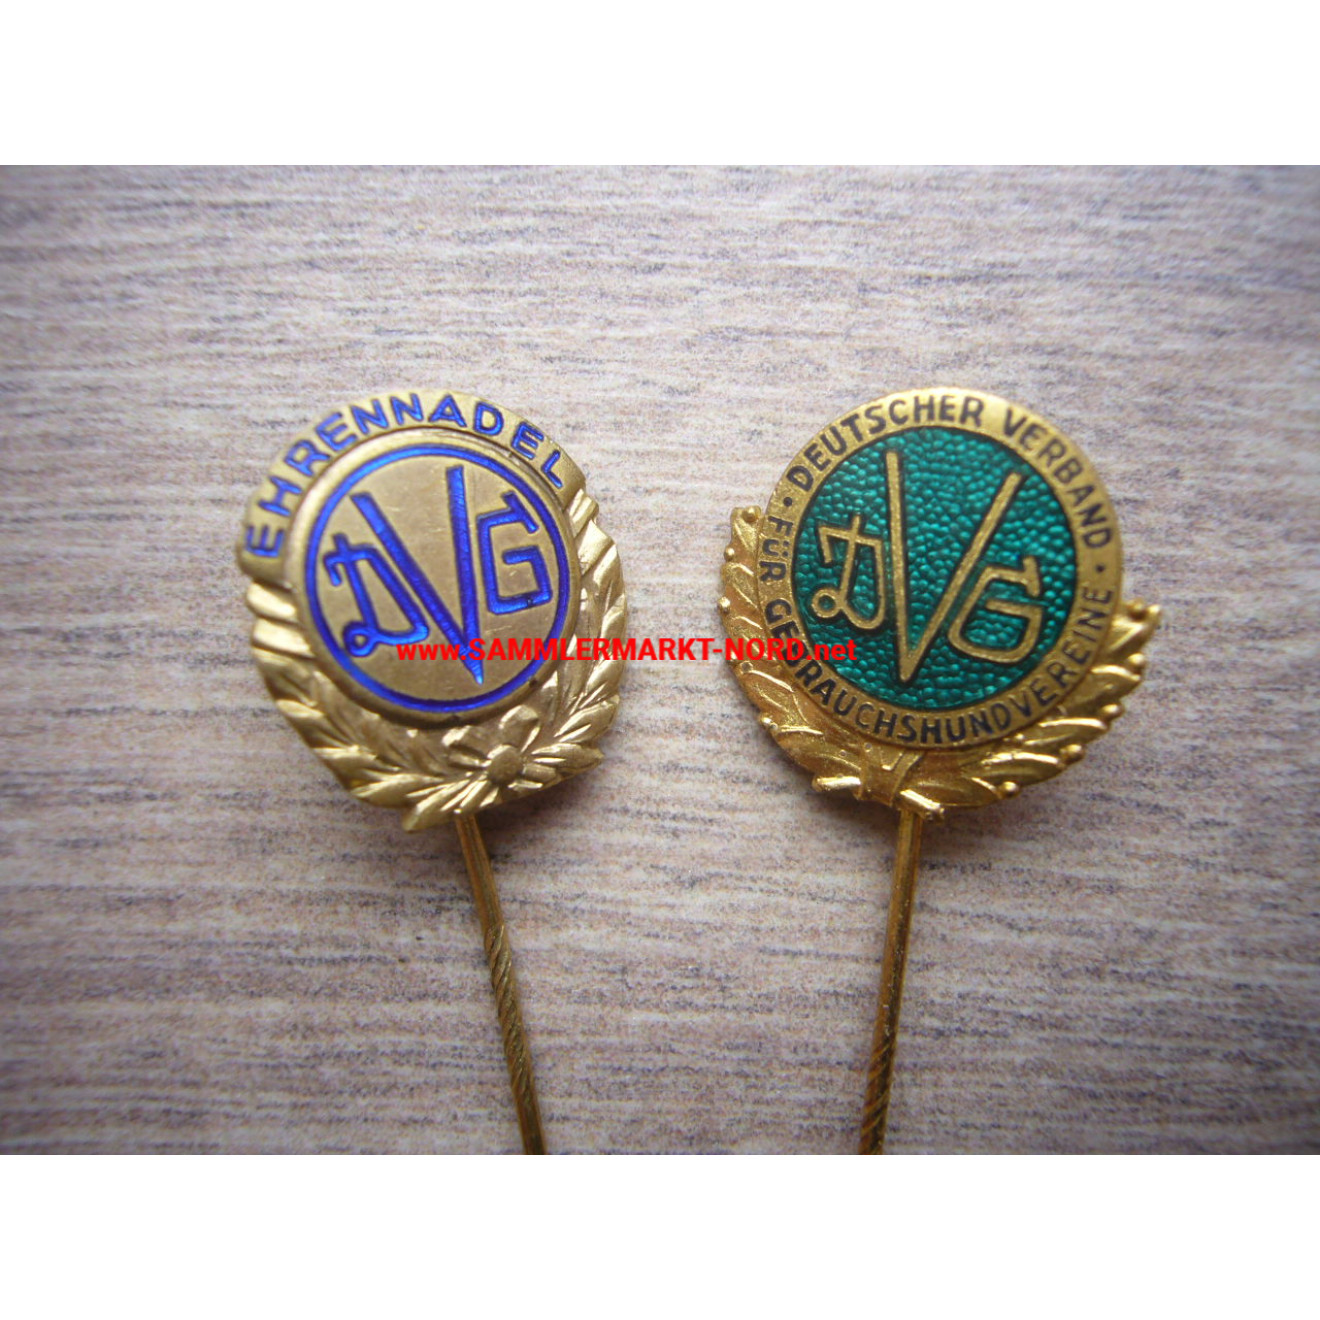 DVG German Association for Utility Dog Clubs - 2 x various honorary pins